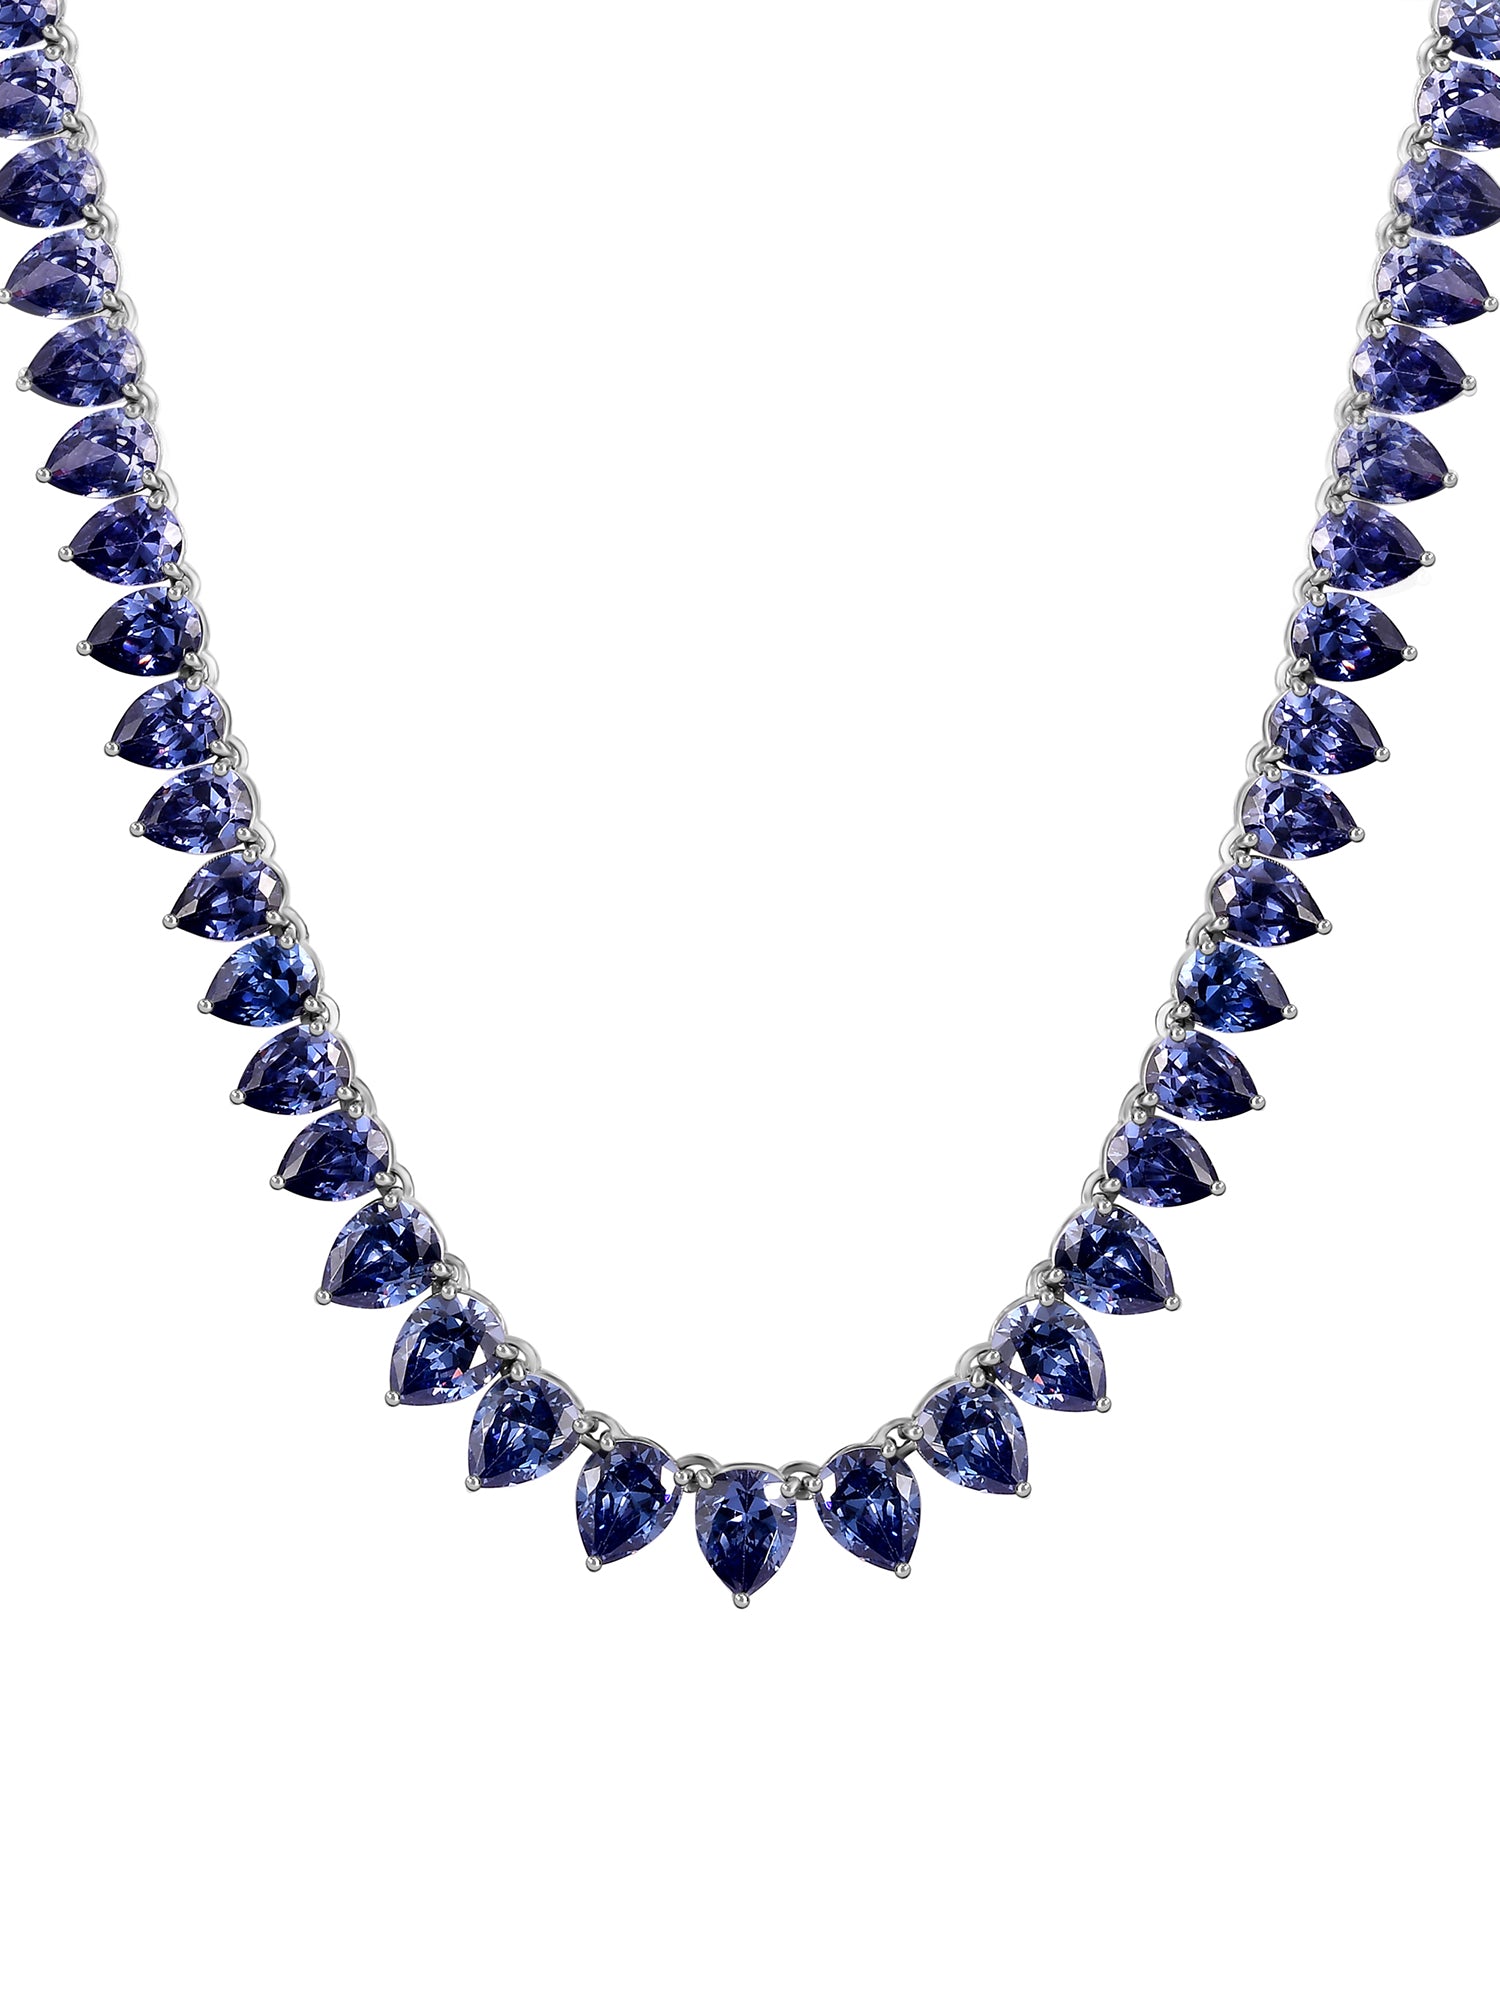 100 Ct. Blue Tanzanite CZ Pear shape Necklace in 925 Sterling Silver-3